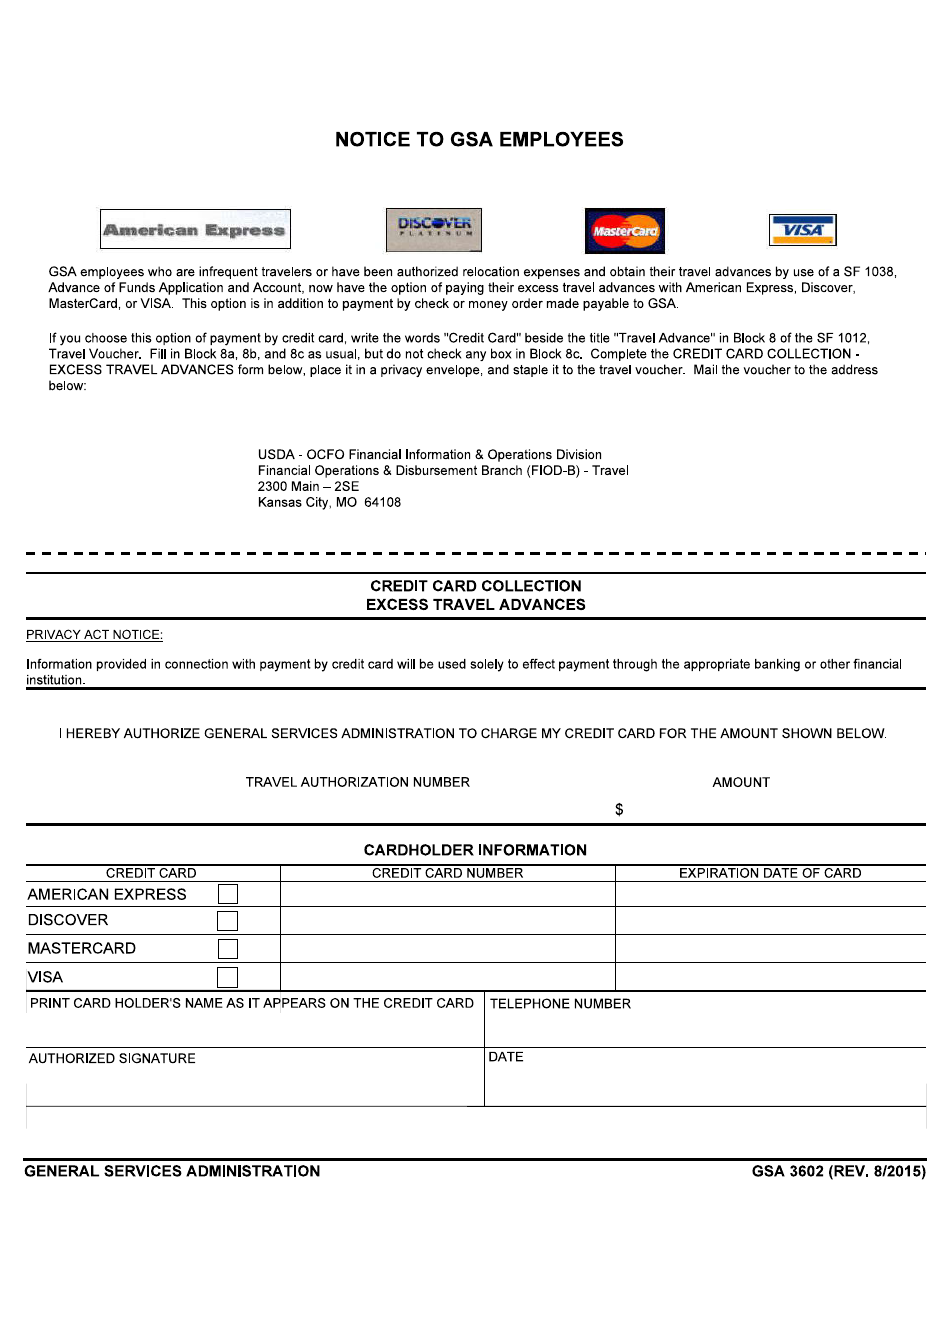 GSA Form 3602 Credit Card Collection - Excess Travel Advances, Page 1